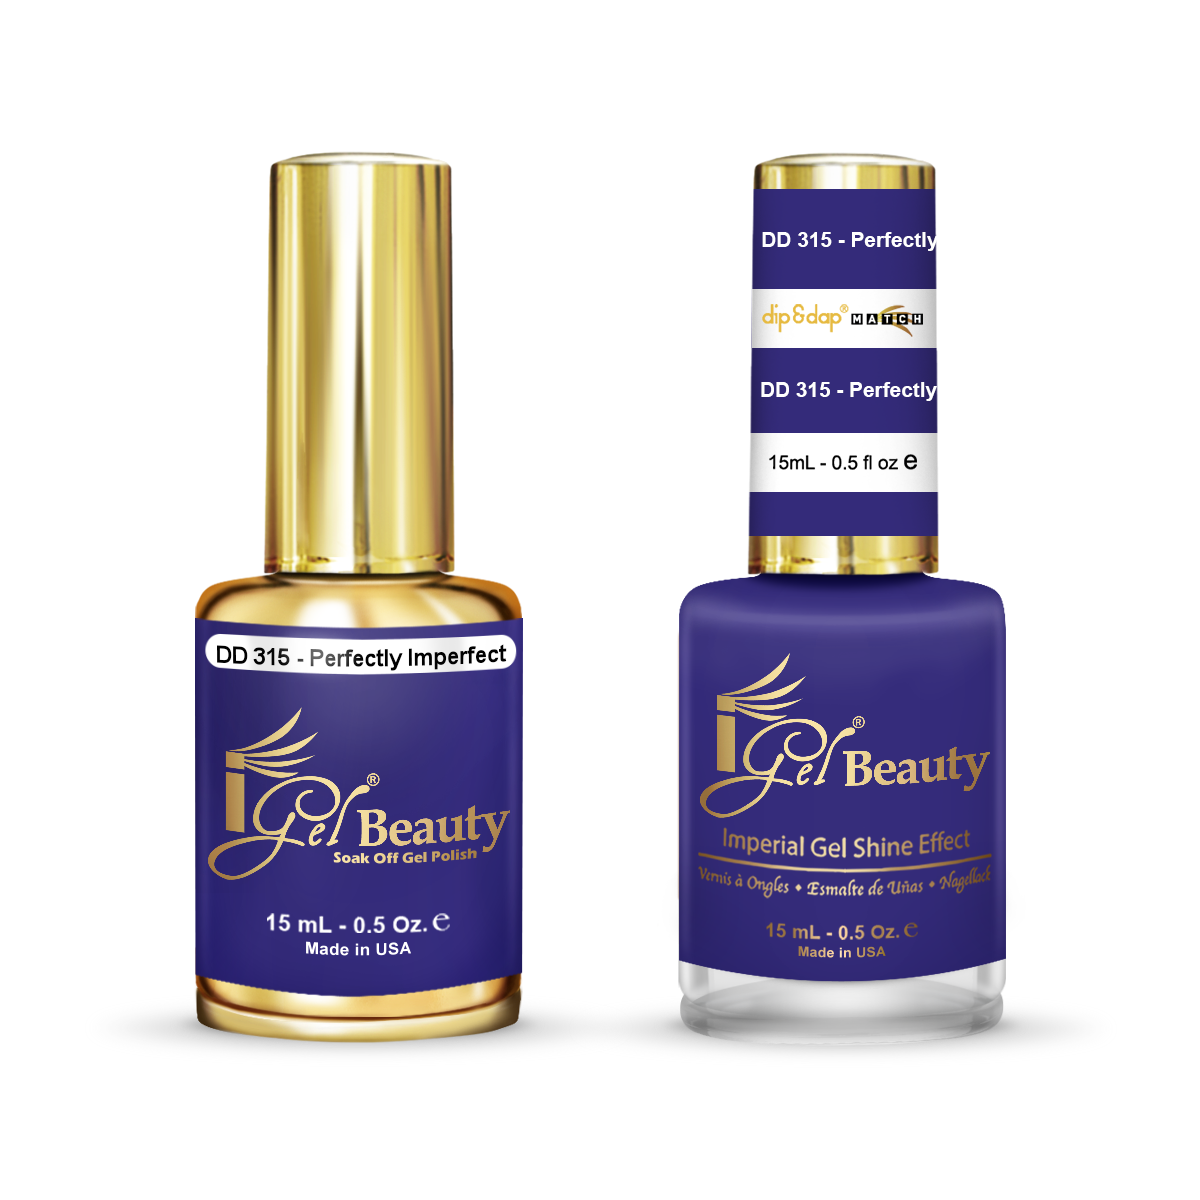 DD315 Perfectly Imperfect Gel and Polish Duo By IGel Beauty